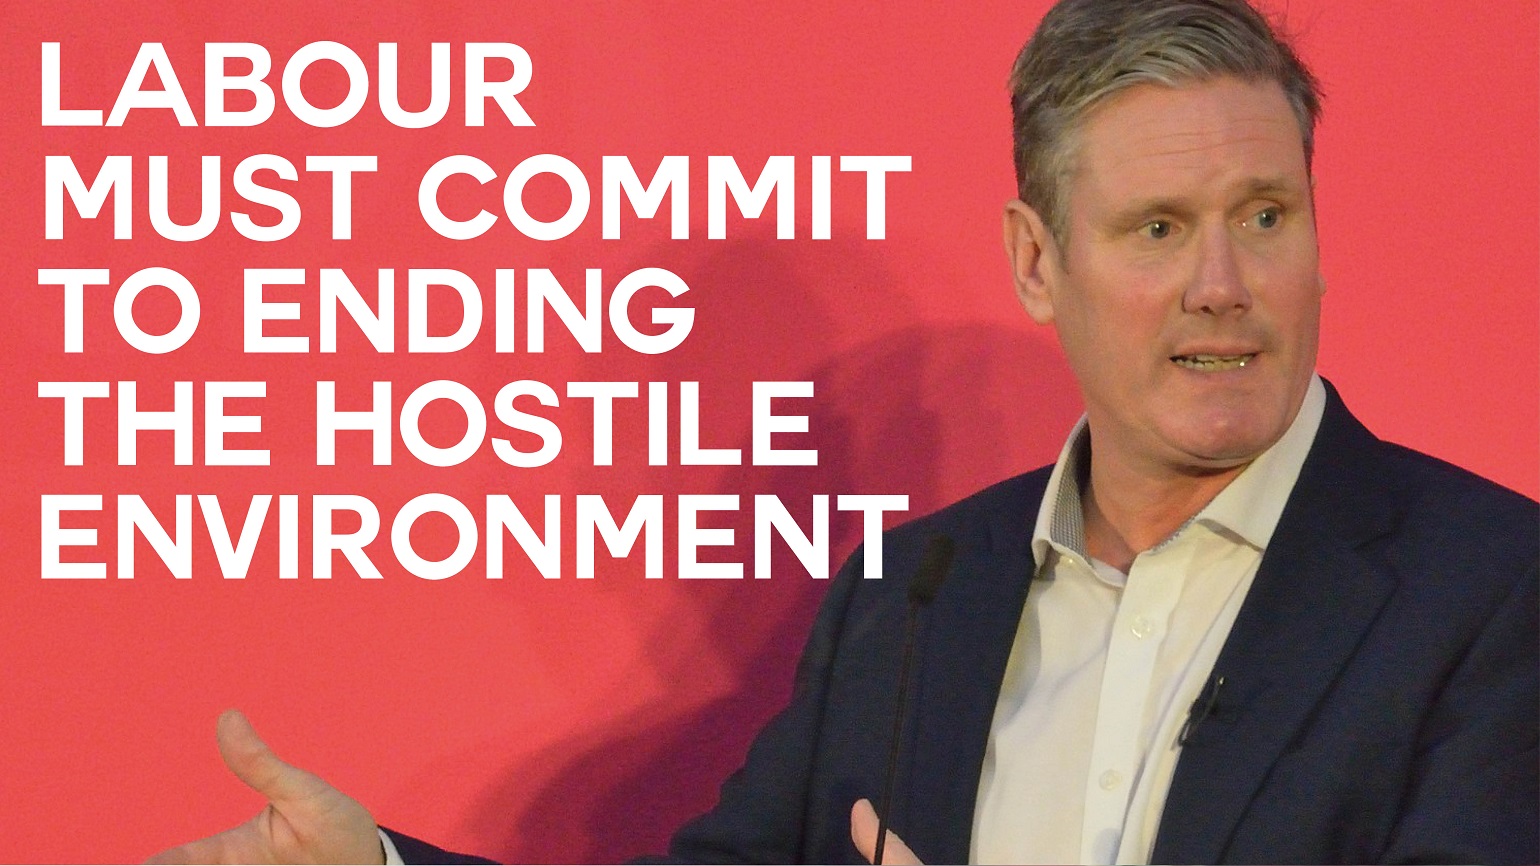 A photo of Keir Starmer with text reading "Labour must commit to ending the hostile environment"